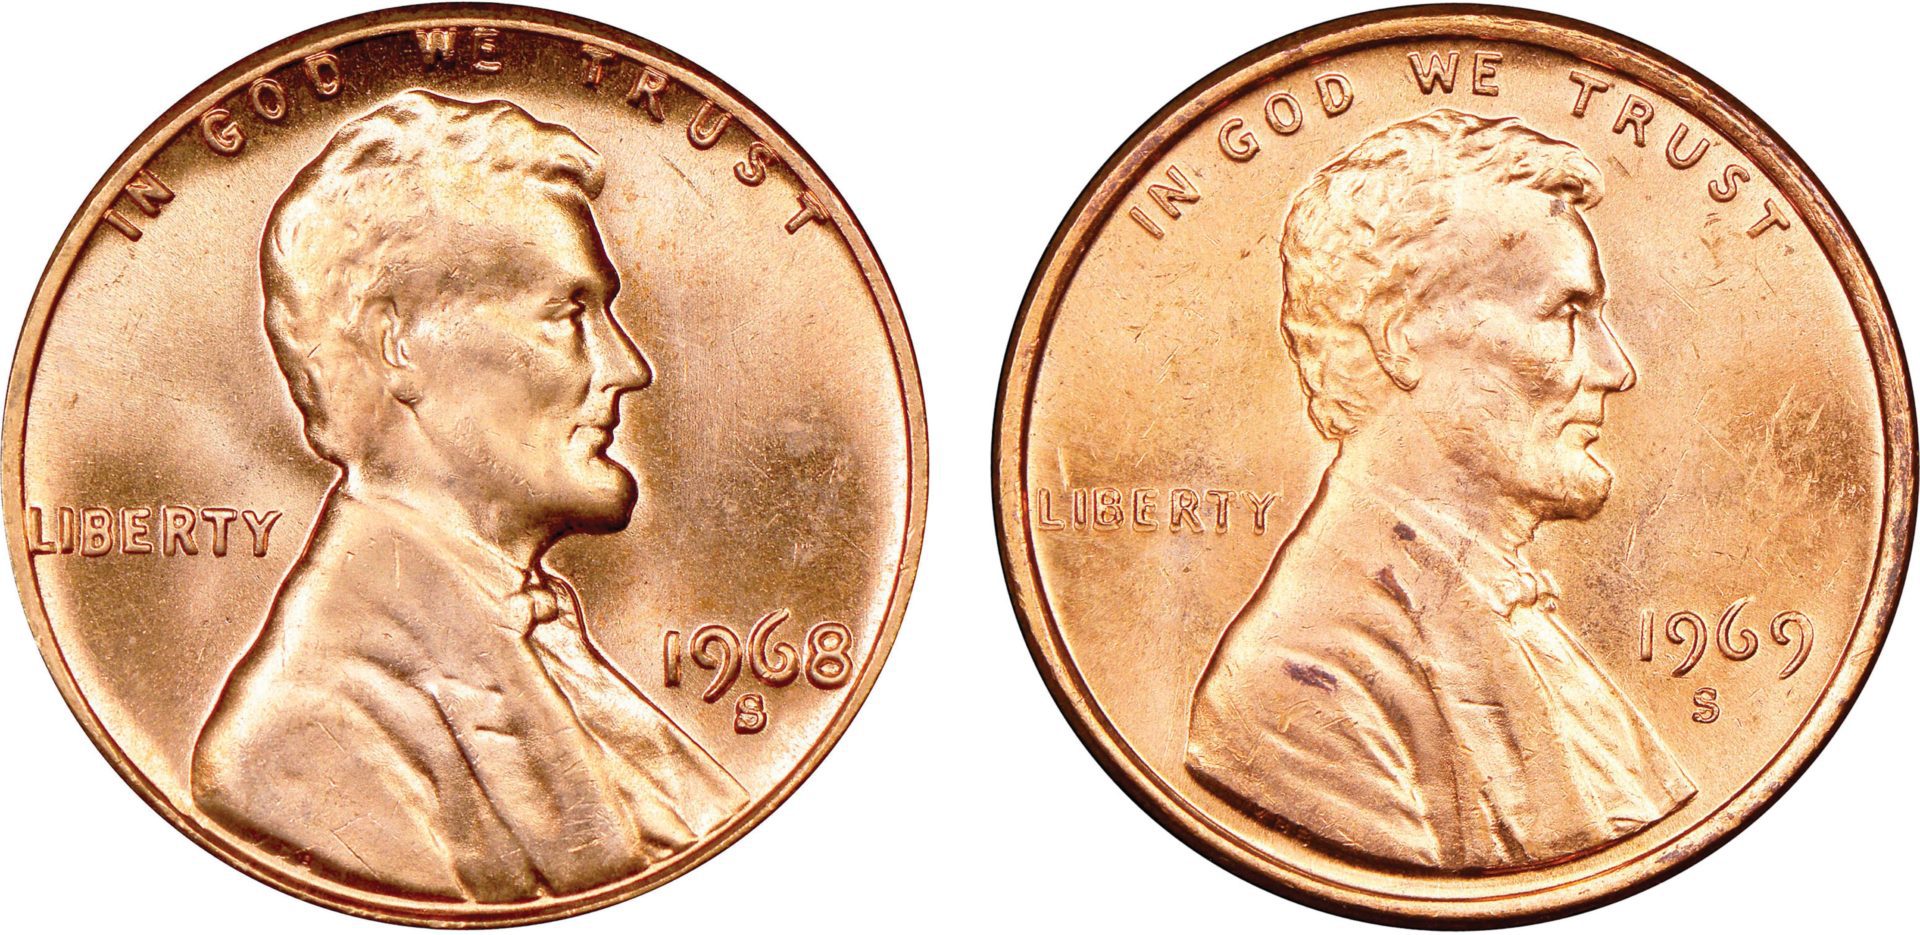 A comparison of the 1968 Lincoln cent to the 1969 Lincoln cent